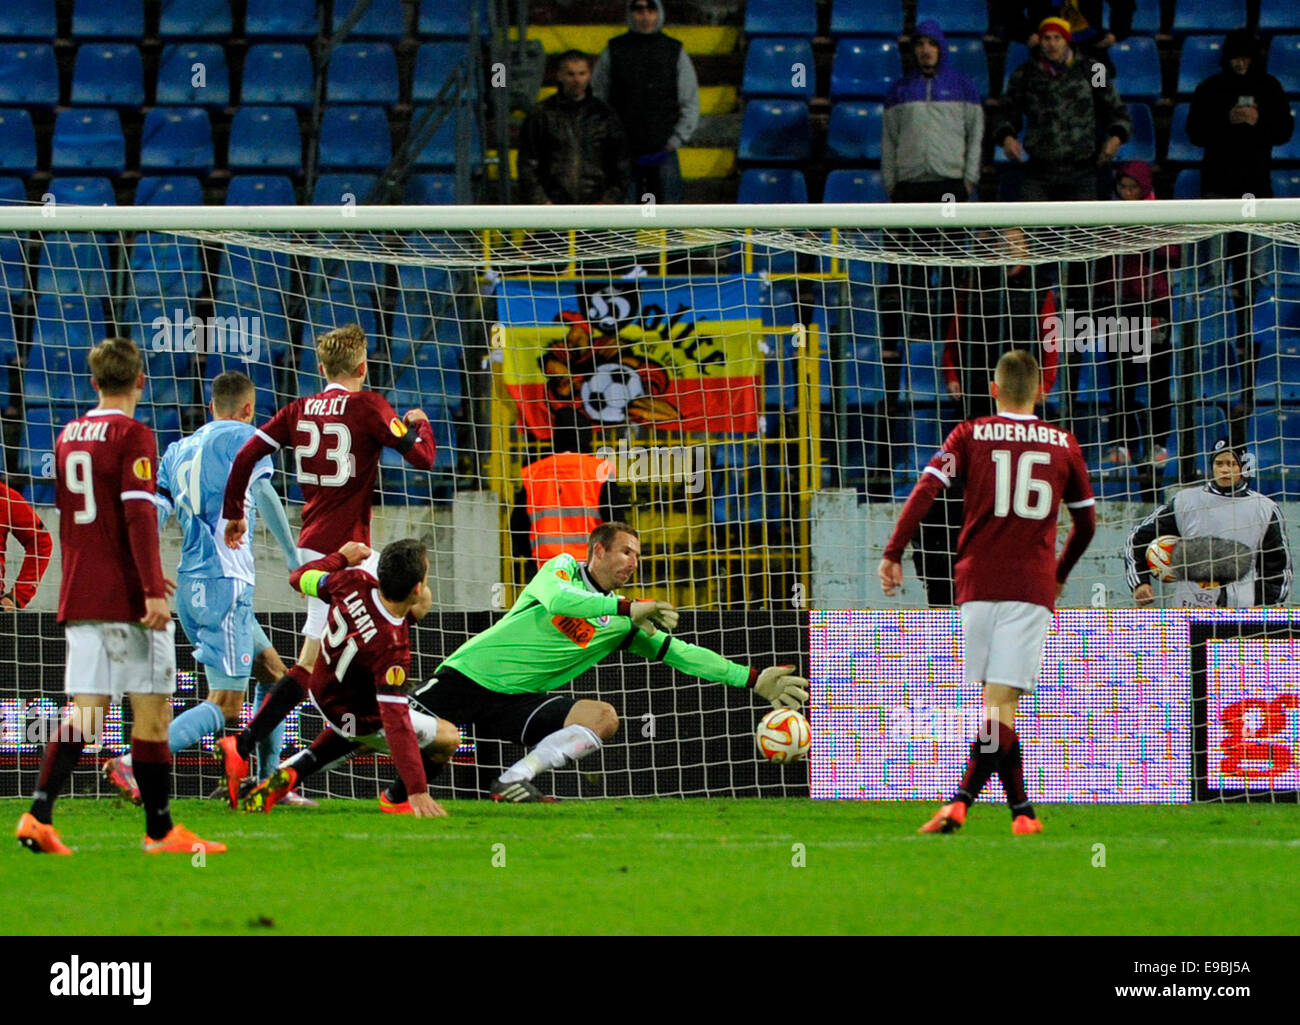 Bratislava, Slovakia. 23rd Oct, 2014. Sparta's David Lafata, fourth left, scores against Slovan's goalkeeper Dusan Pernis his side's first goal during the Europa League Group I match between Slovan Bratislava and Sparta Prague at the Pasienky Stadium in Bratislava, Slovakia, Thursday, Oct. 23, 2014. Sparta won 3-0 after the match had to be due to the ravages of visiting hooligans about 35 minutes interrupted. Credit:  Jan Koller/CTK Photo/Alamy Live News Stock Photo